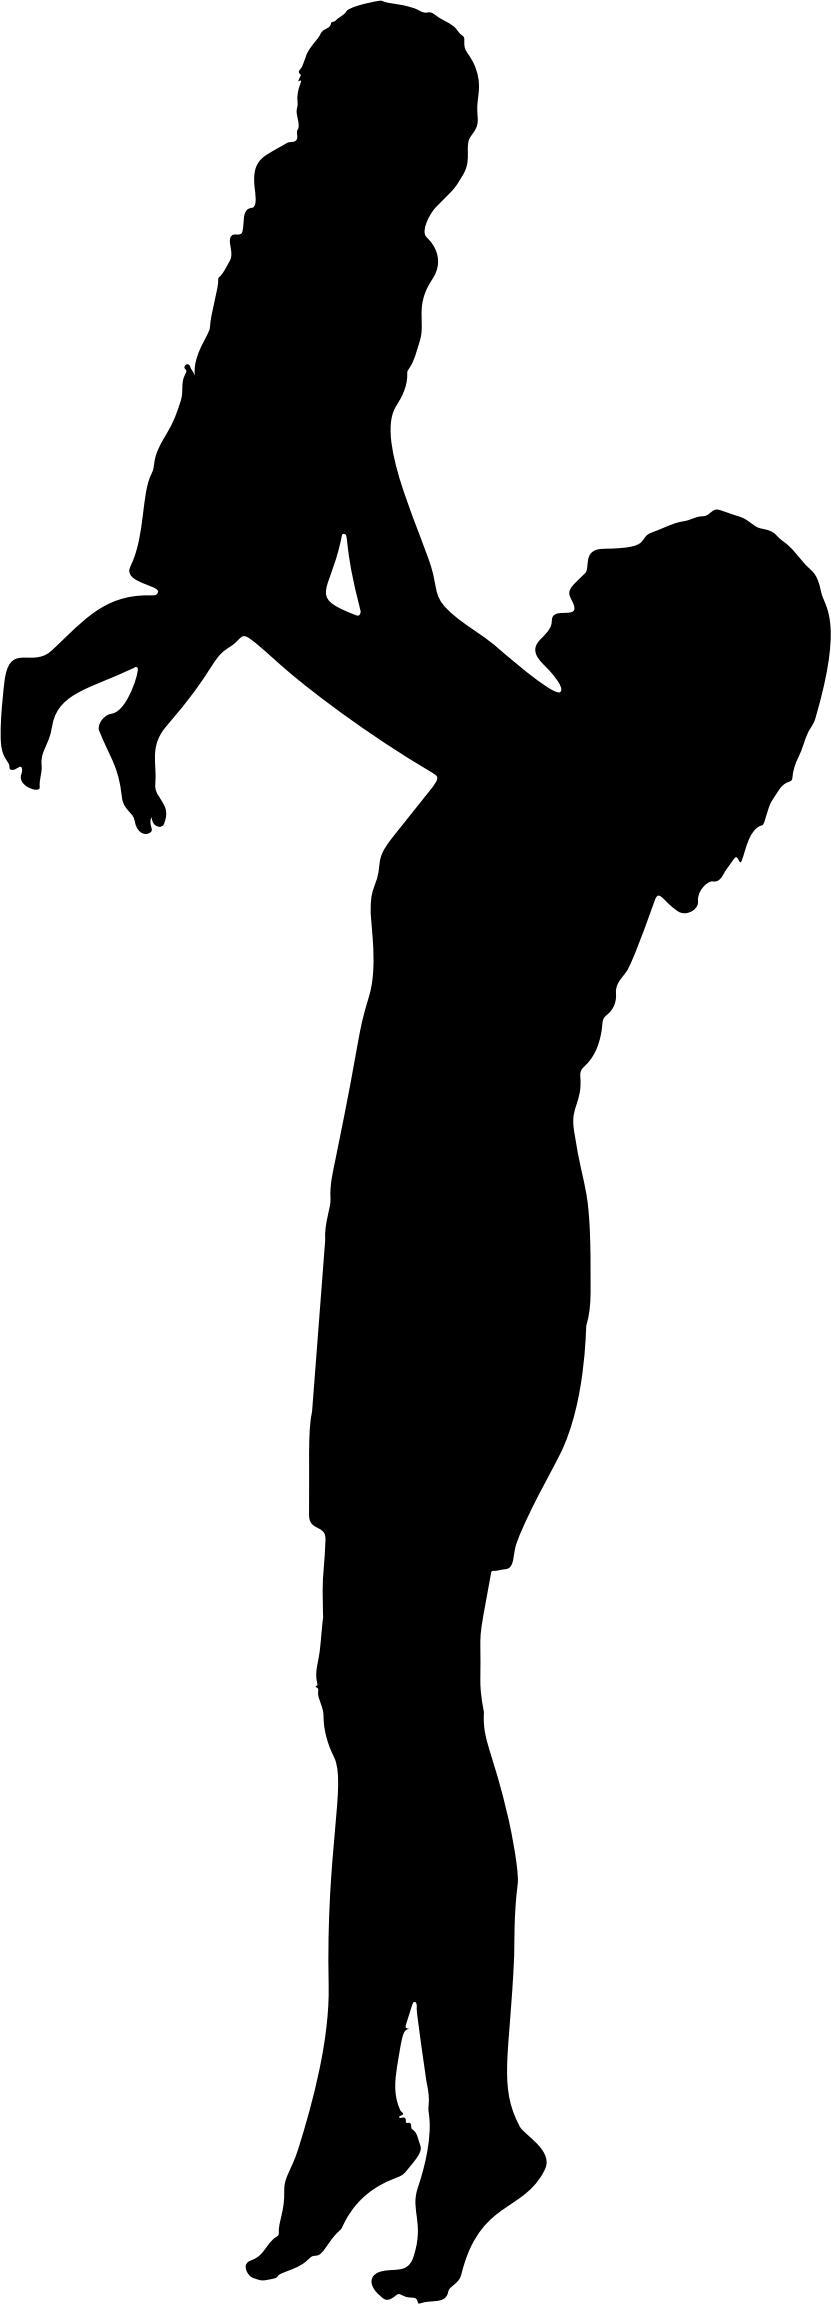 Mother Playing With Infant Silhouette png transparent